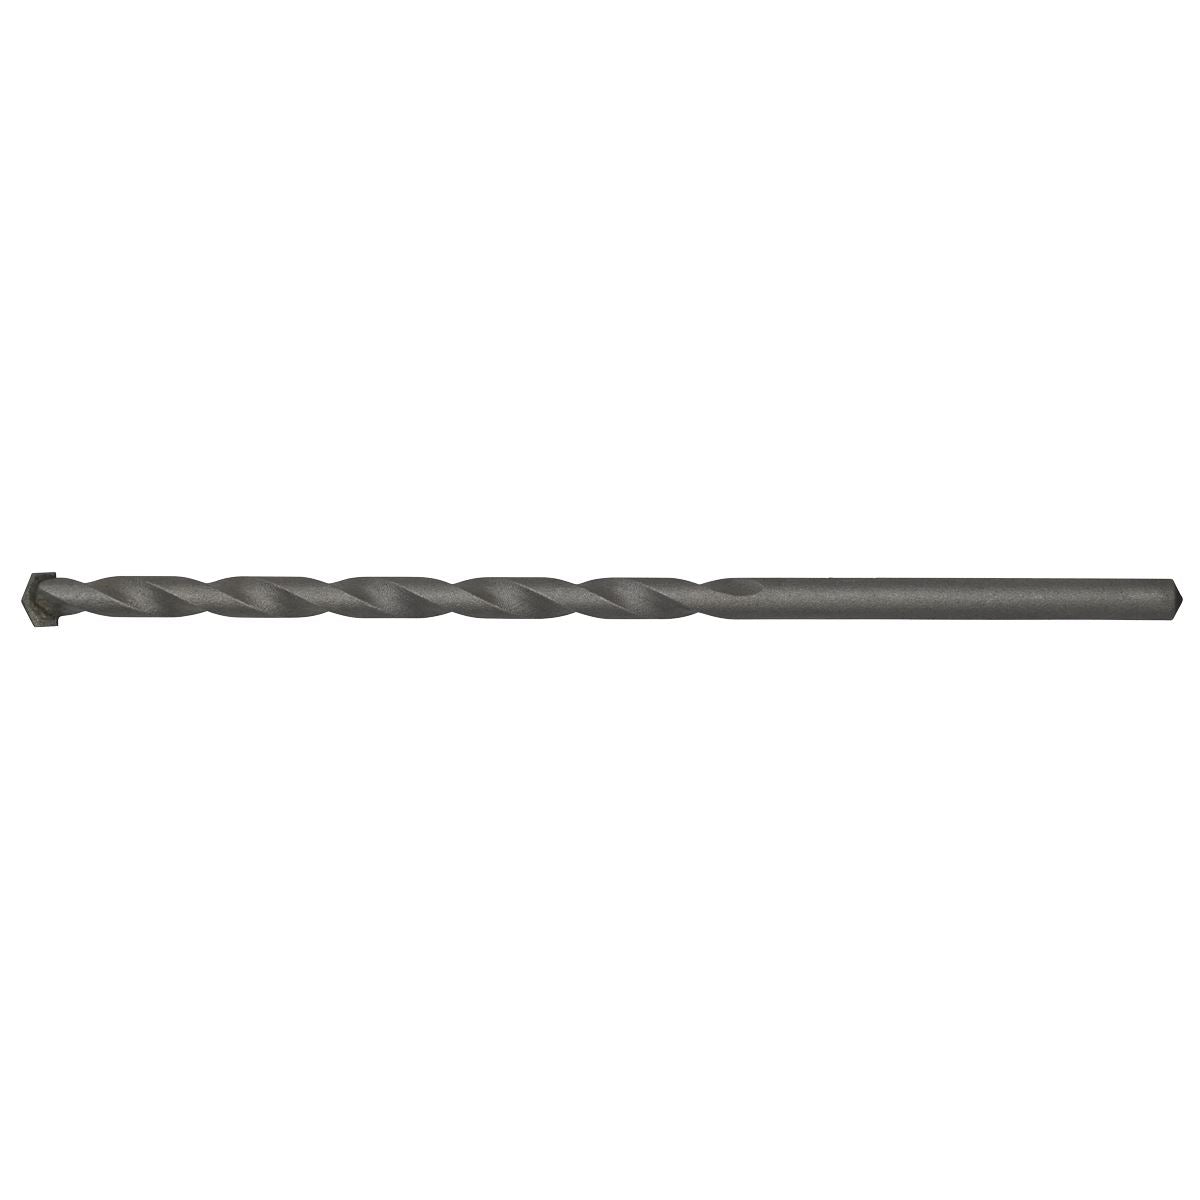 Worksafe by Sealey Straight Shank Rotary Impact Drill Bit Ø7 x 150mm